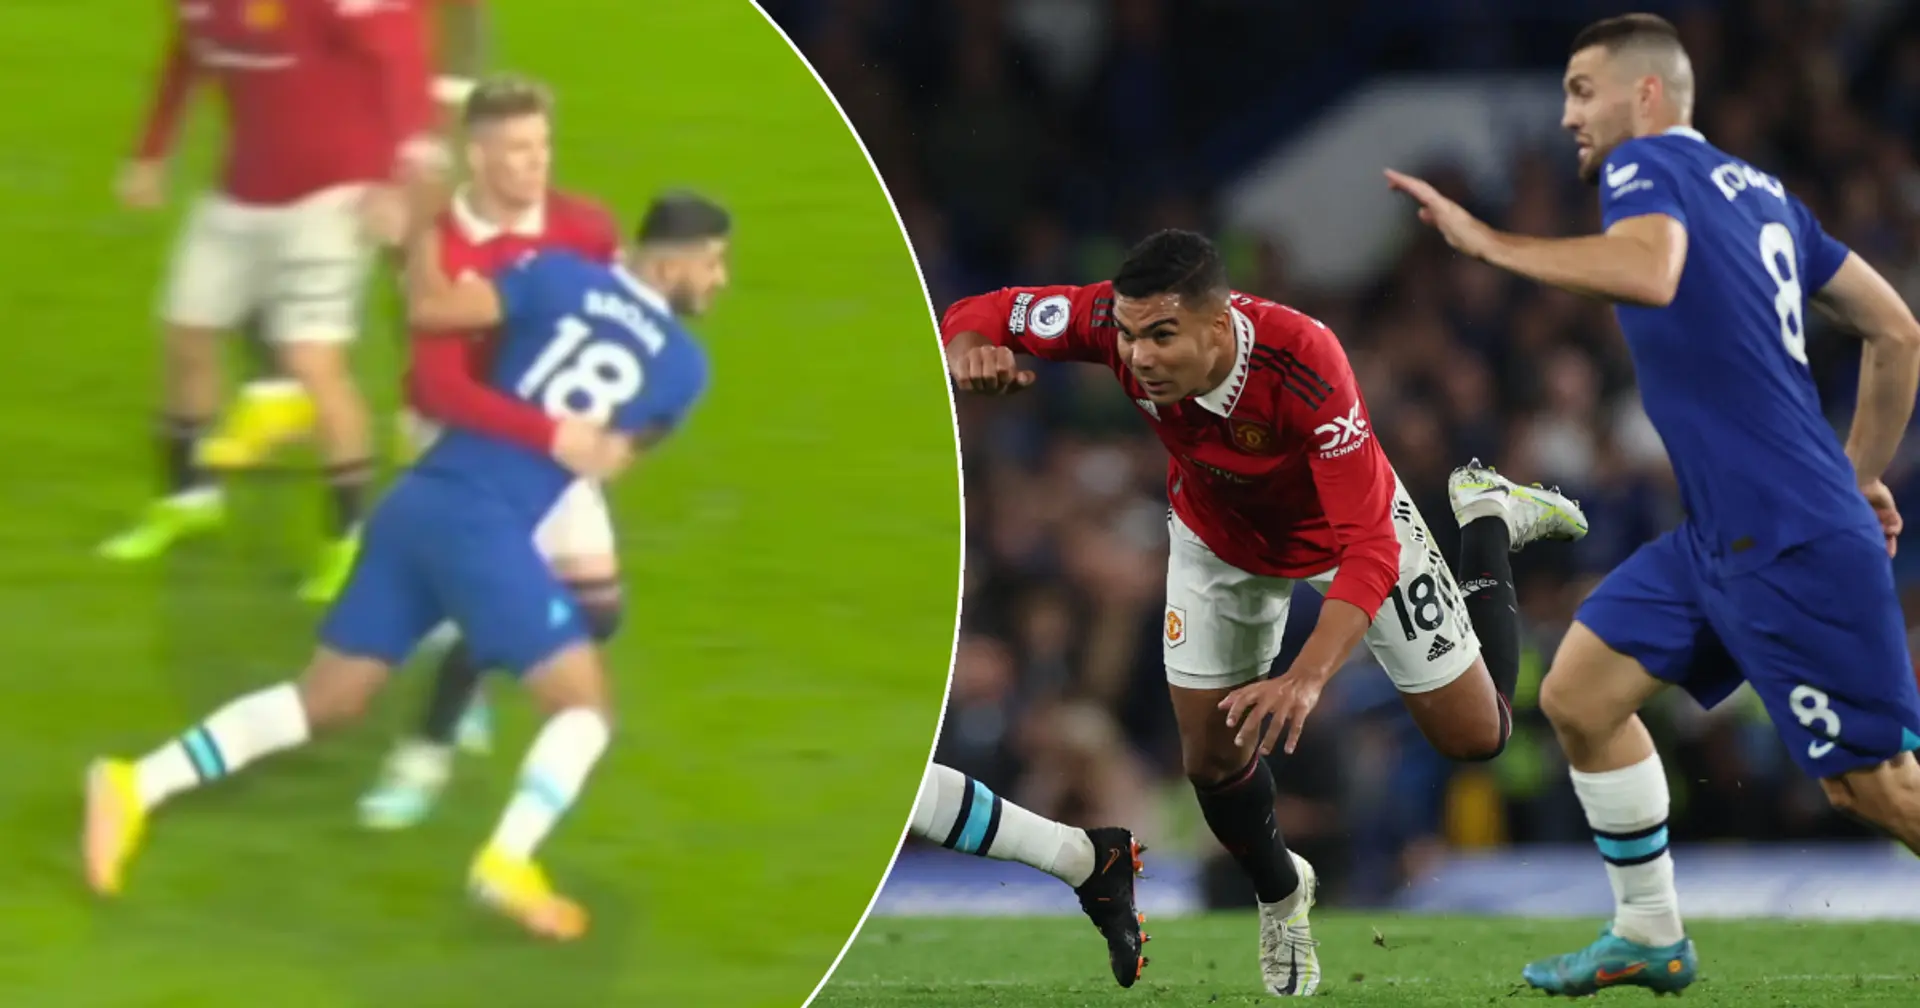 Not McTominay: Man United's biggest weakness in Chelsea draw shown in line-up